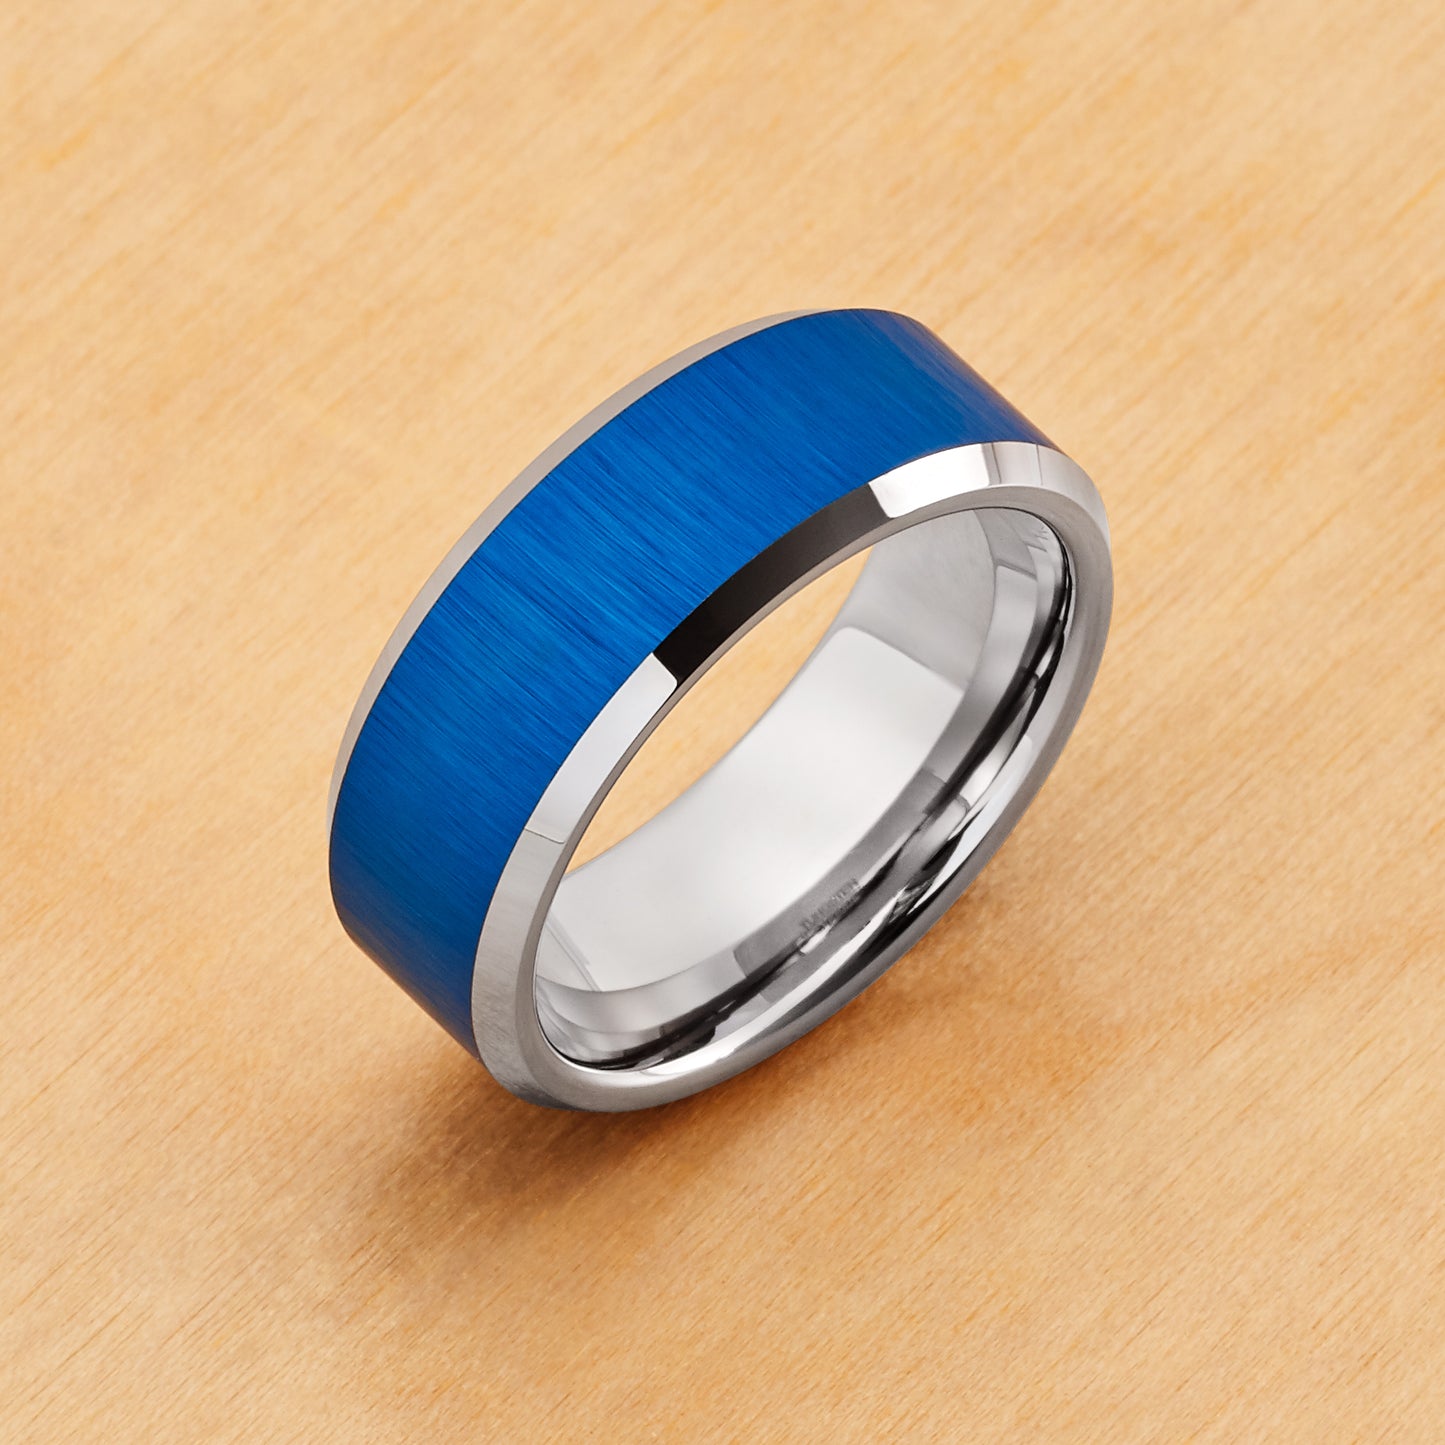 TR705 - Blue Plating - Tungsten Ring 8mm, Blue IP Reflective Finish Beveled Edge